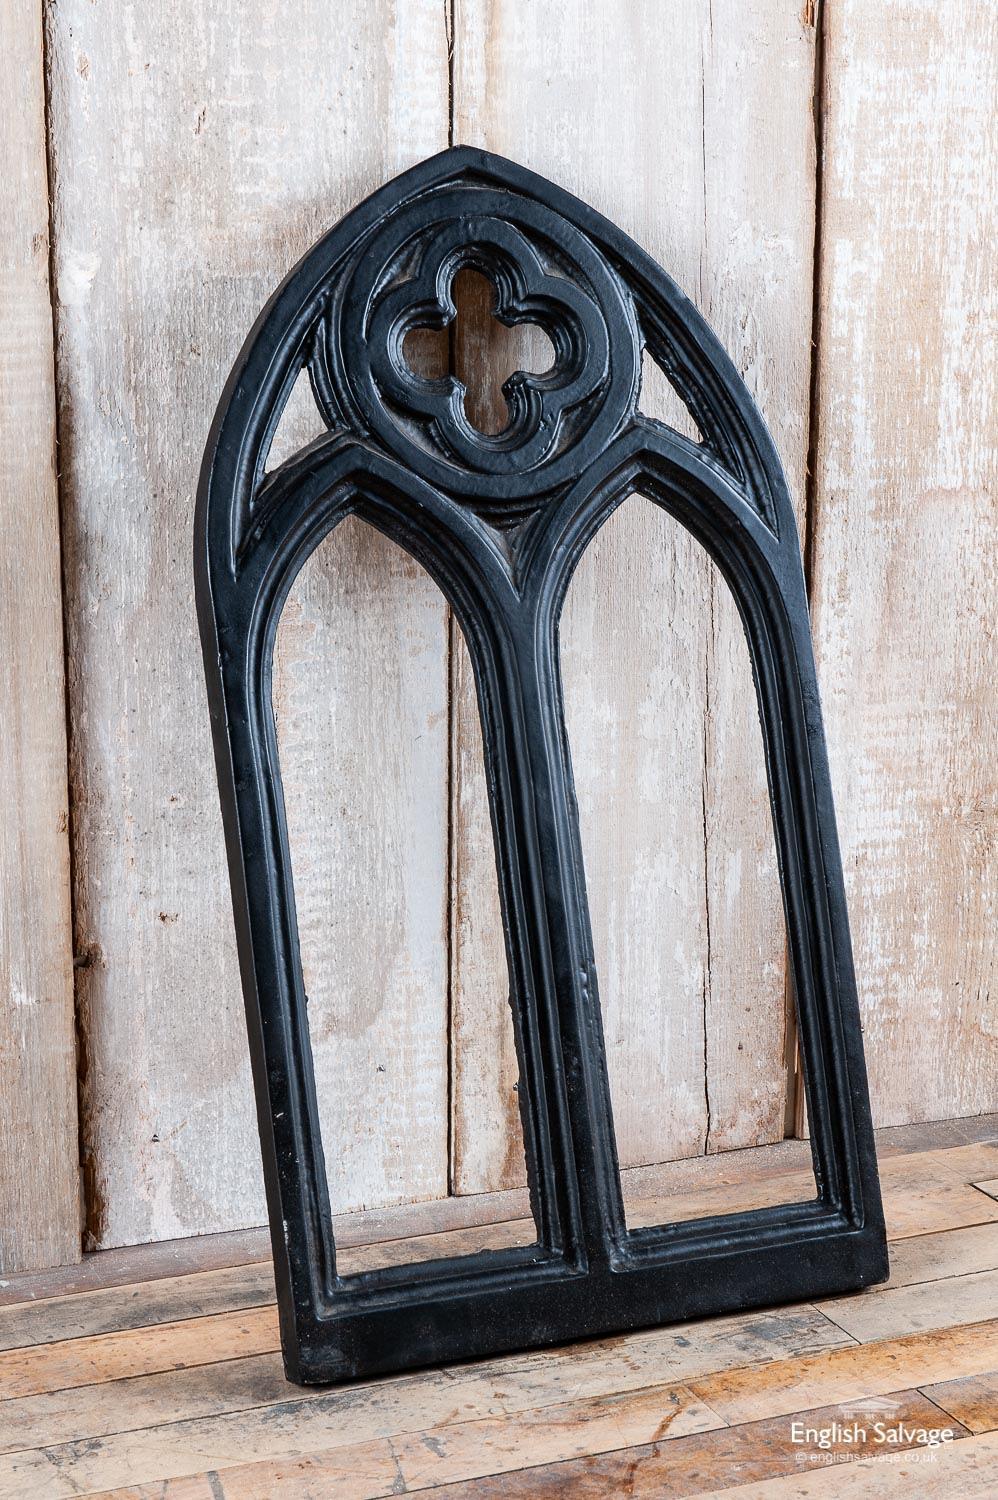 Striking black cast iron Gothic style double arch window frame with quatrefoil detail to the top.